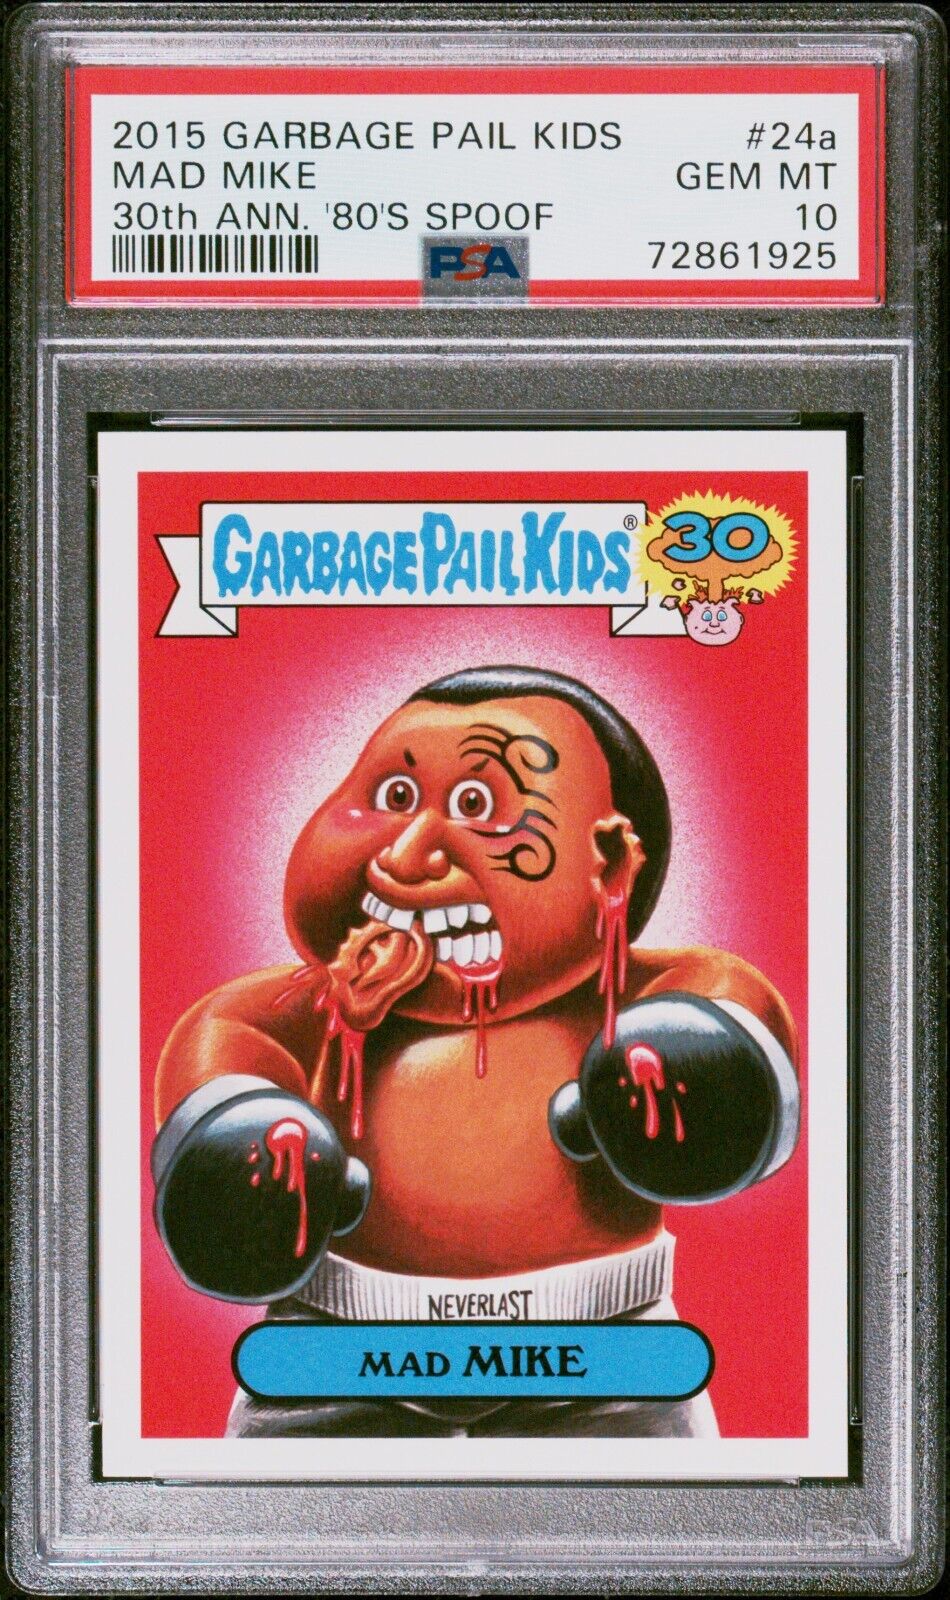 2015 Topps Garbage Pail Kids 30th Anniversary MAD MIKE 24a Card PSA 10 GEM